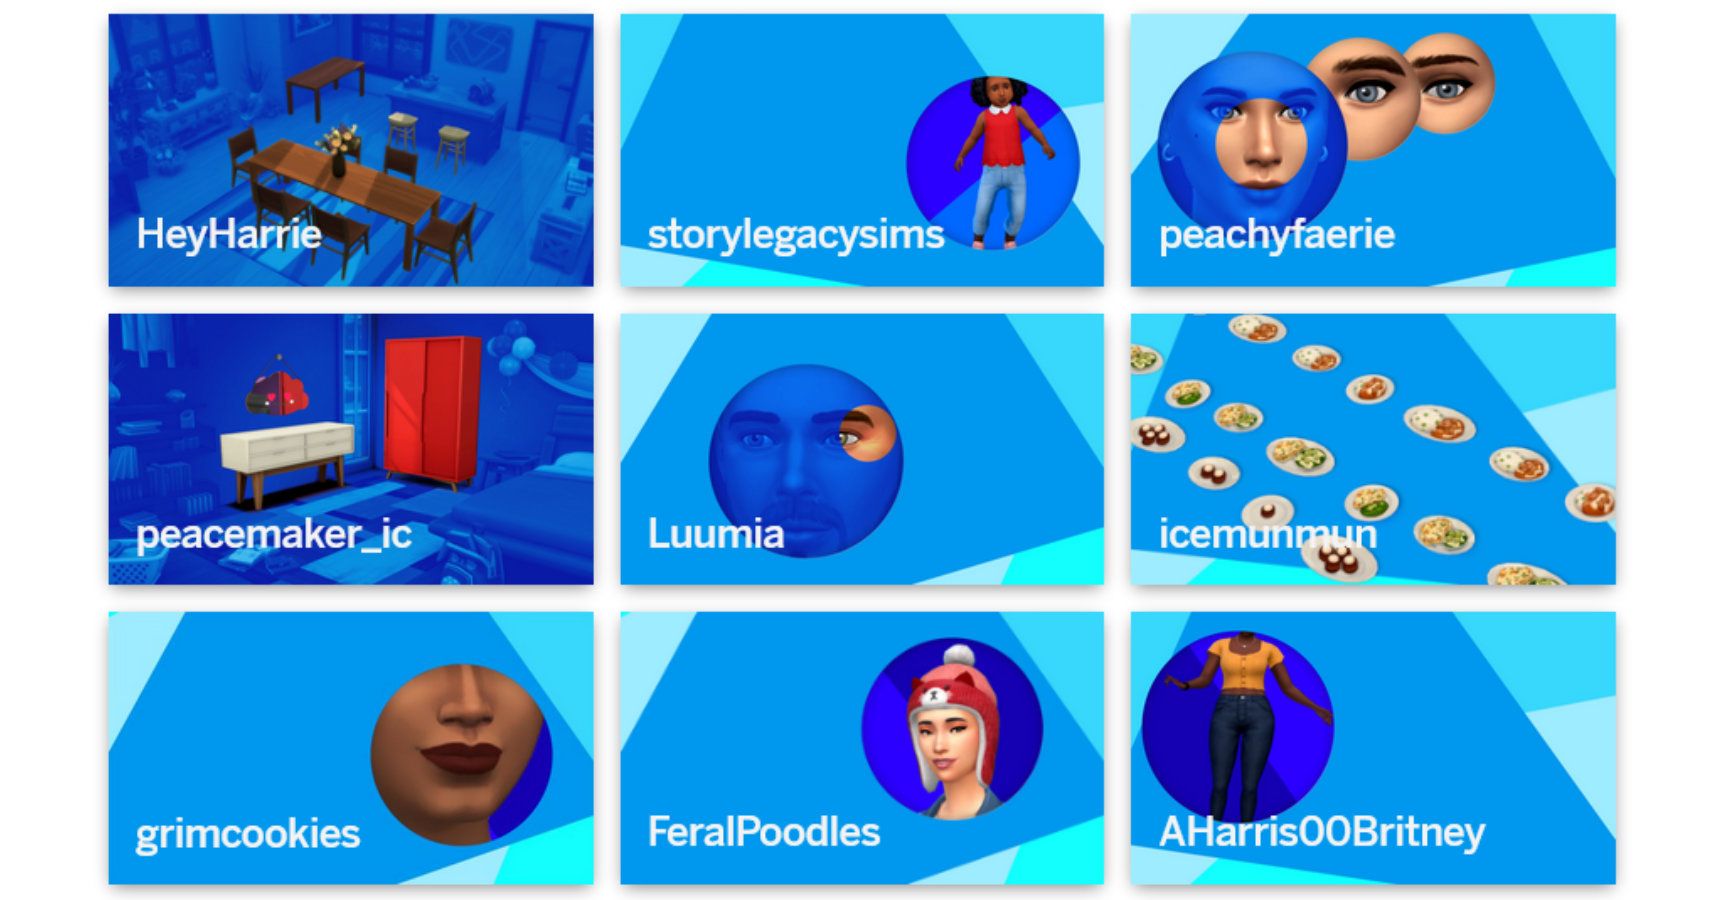 Blue boxes containing the name and items each creator added to the update.